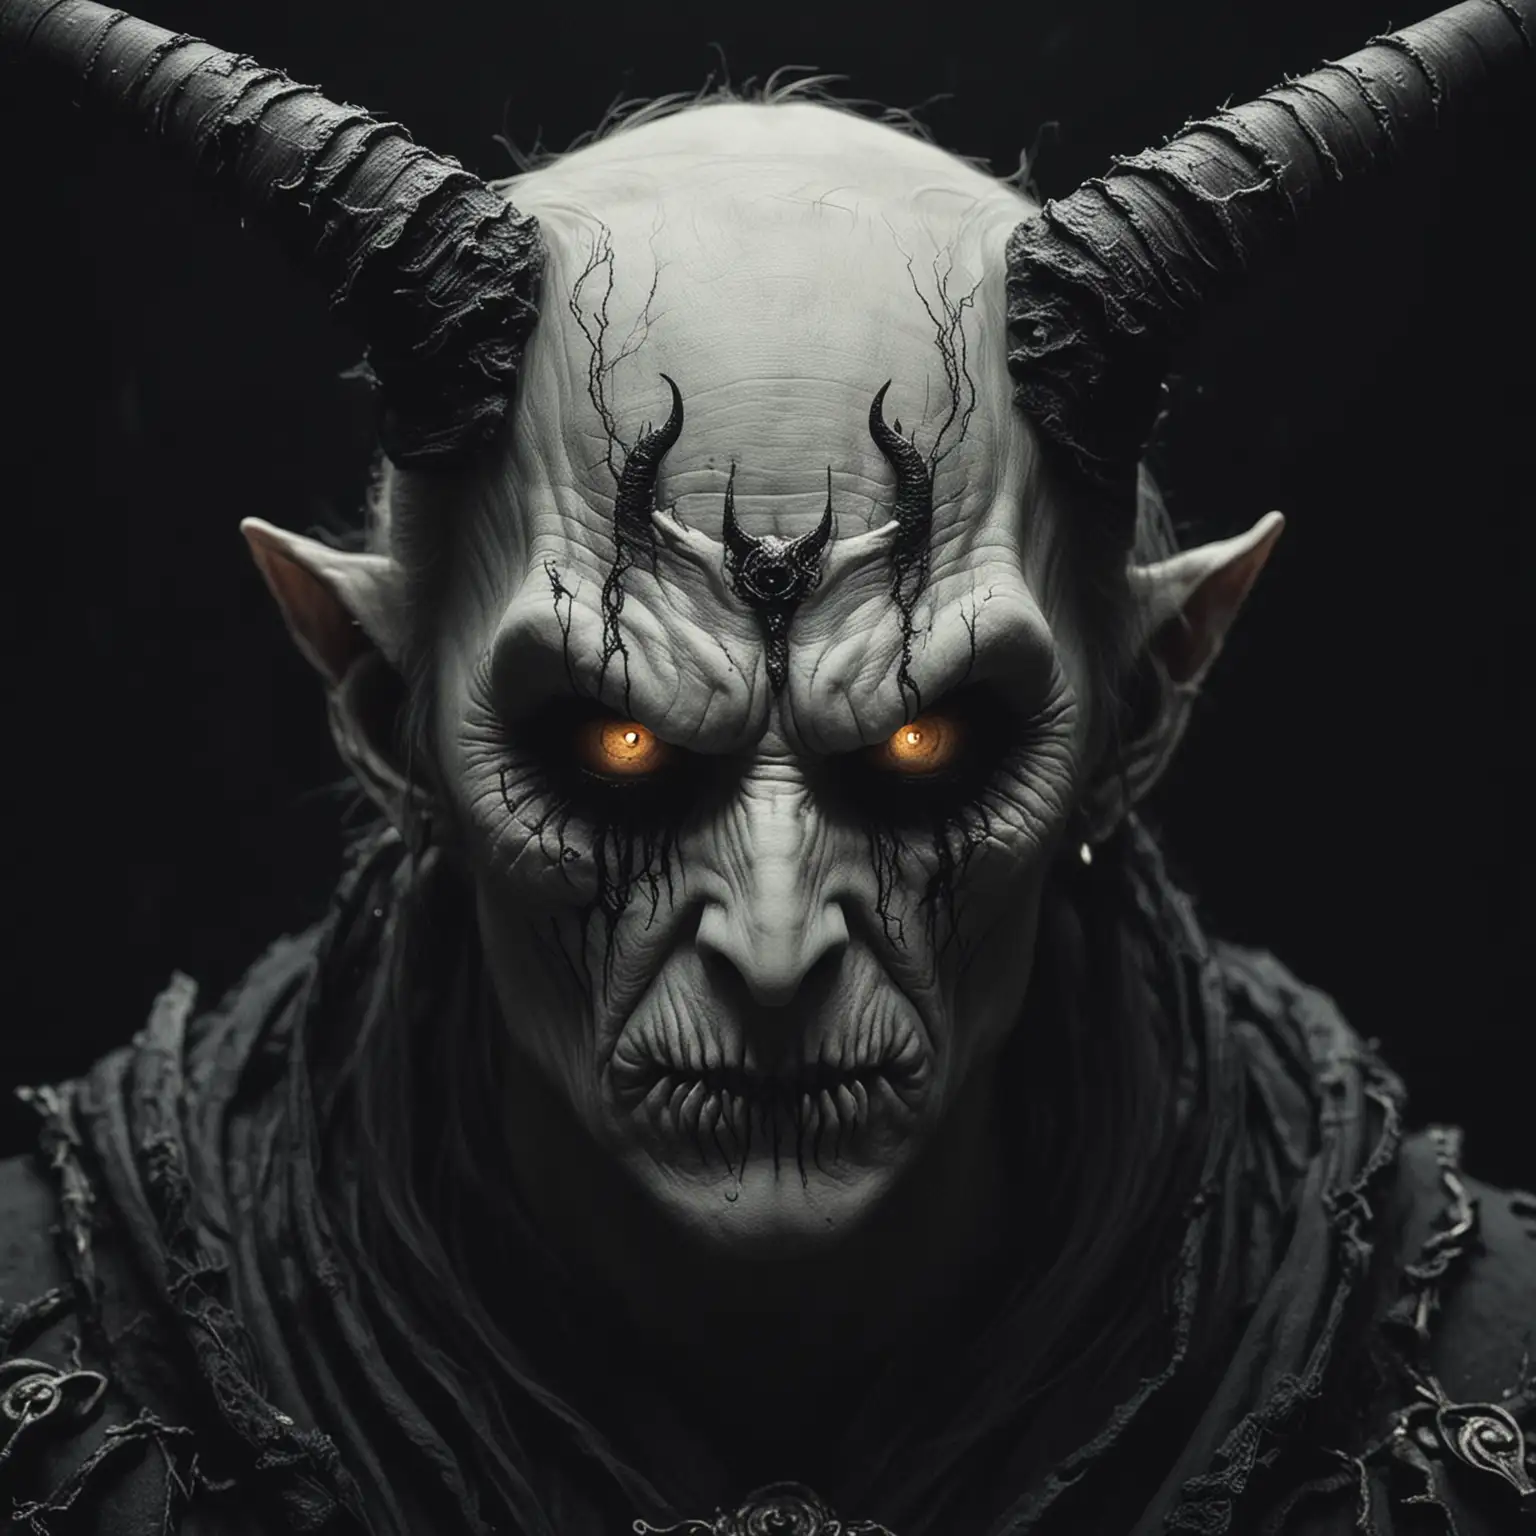 Creepy-Demon-with-Horns-and-White-Eyes-in-a-Dark-Setting